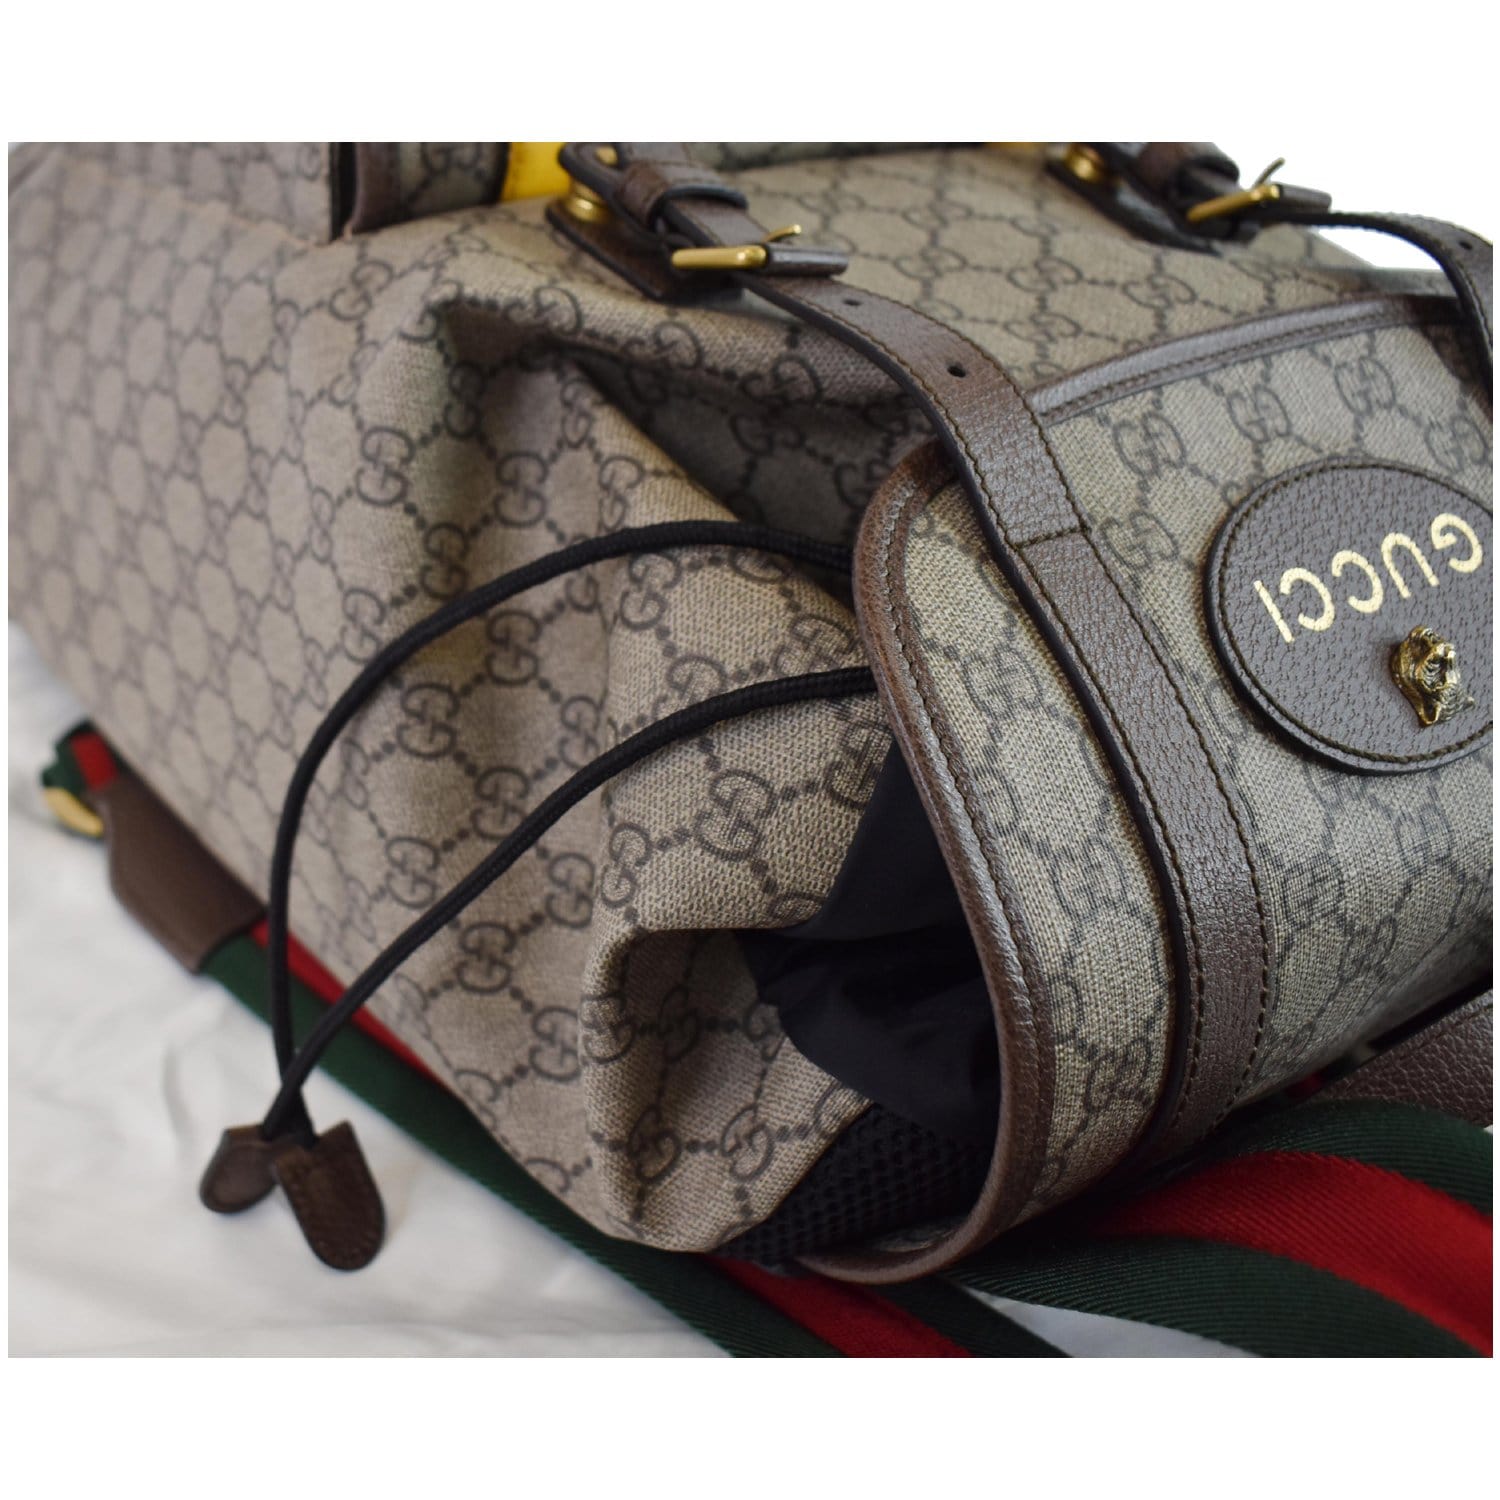 Gucci Courrier Soft GG Supreme Backpack